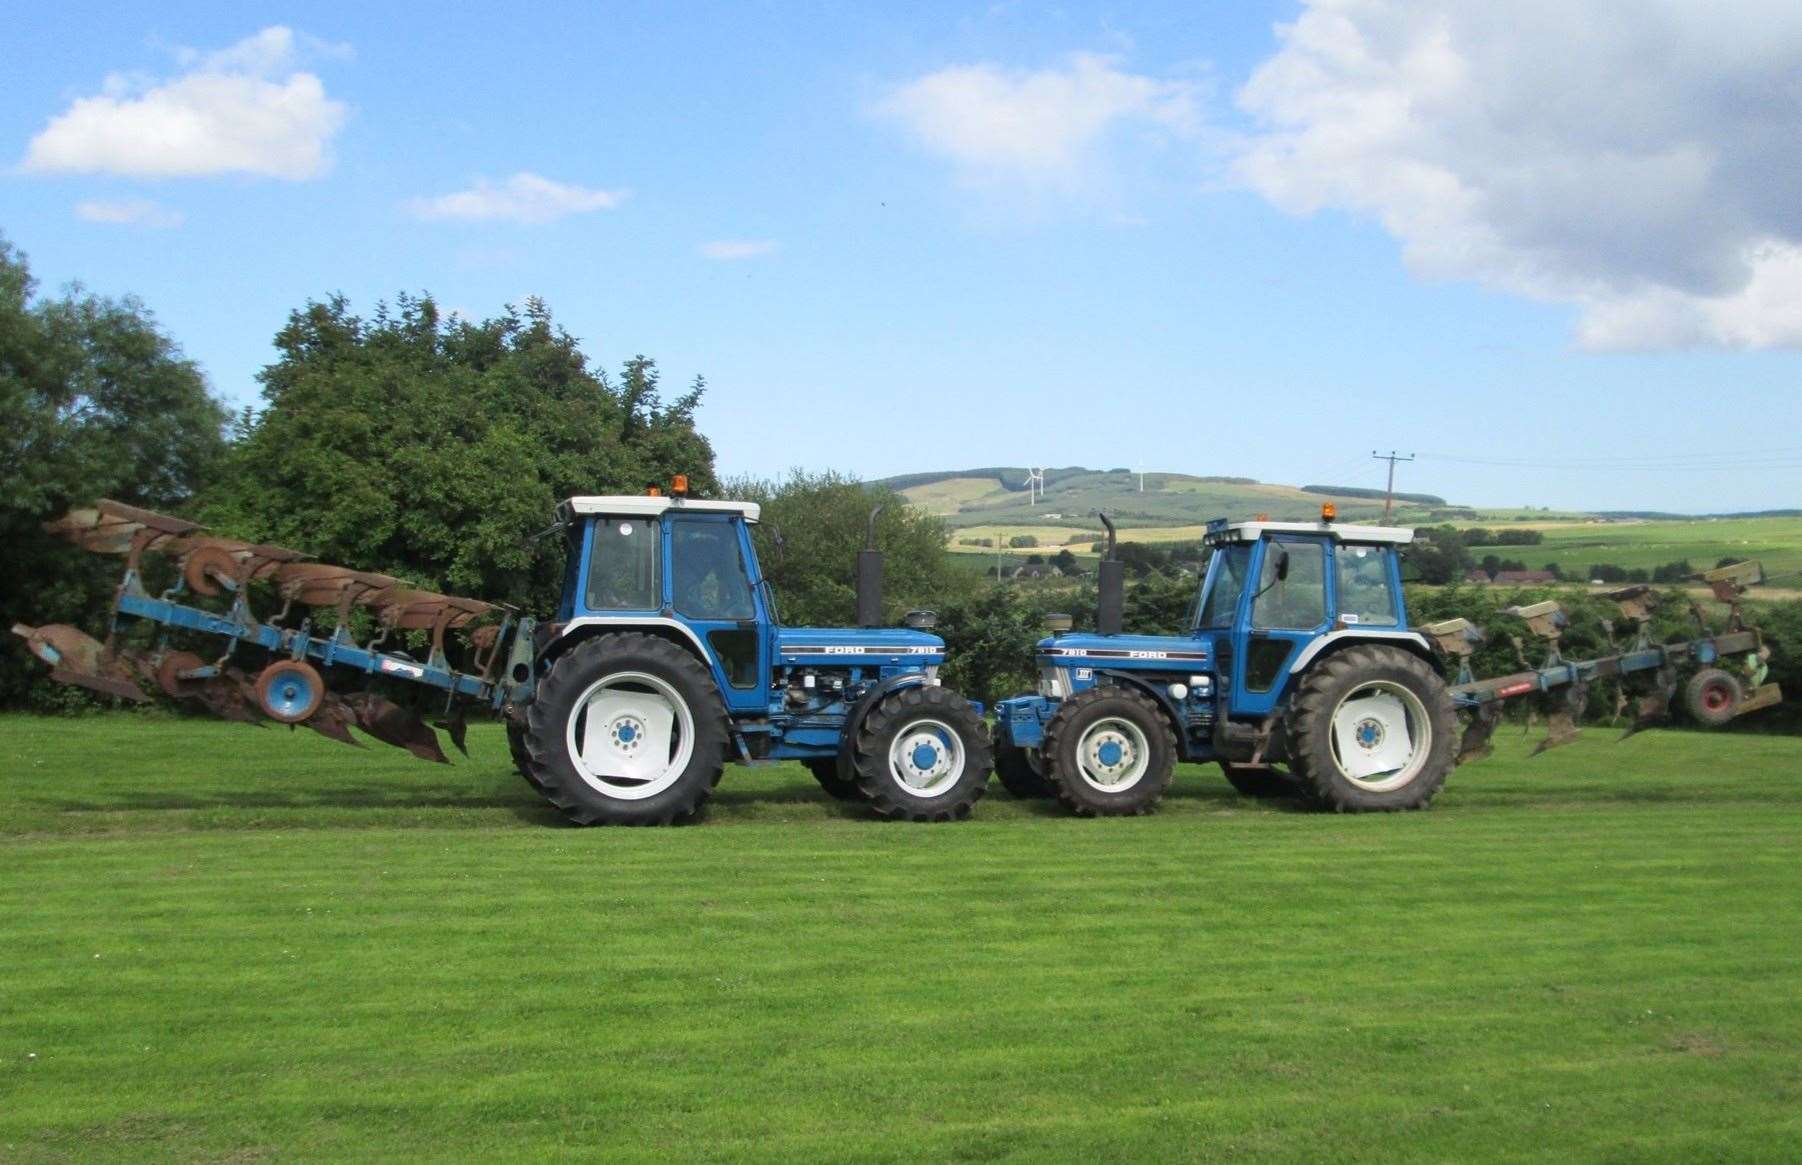 Two tractors will be driven through the night as part of Ian McDonald's 24-hour plough challenge in aid of cancer charities.